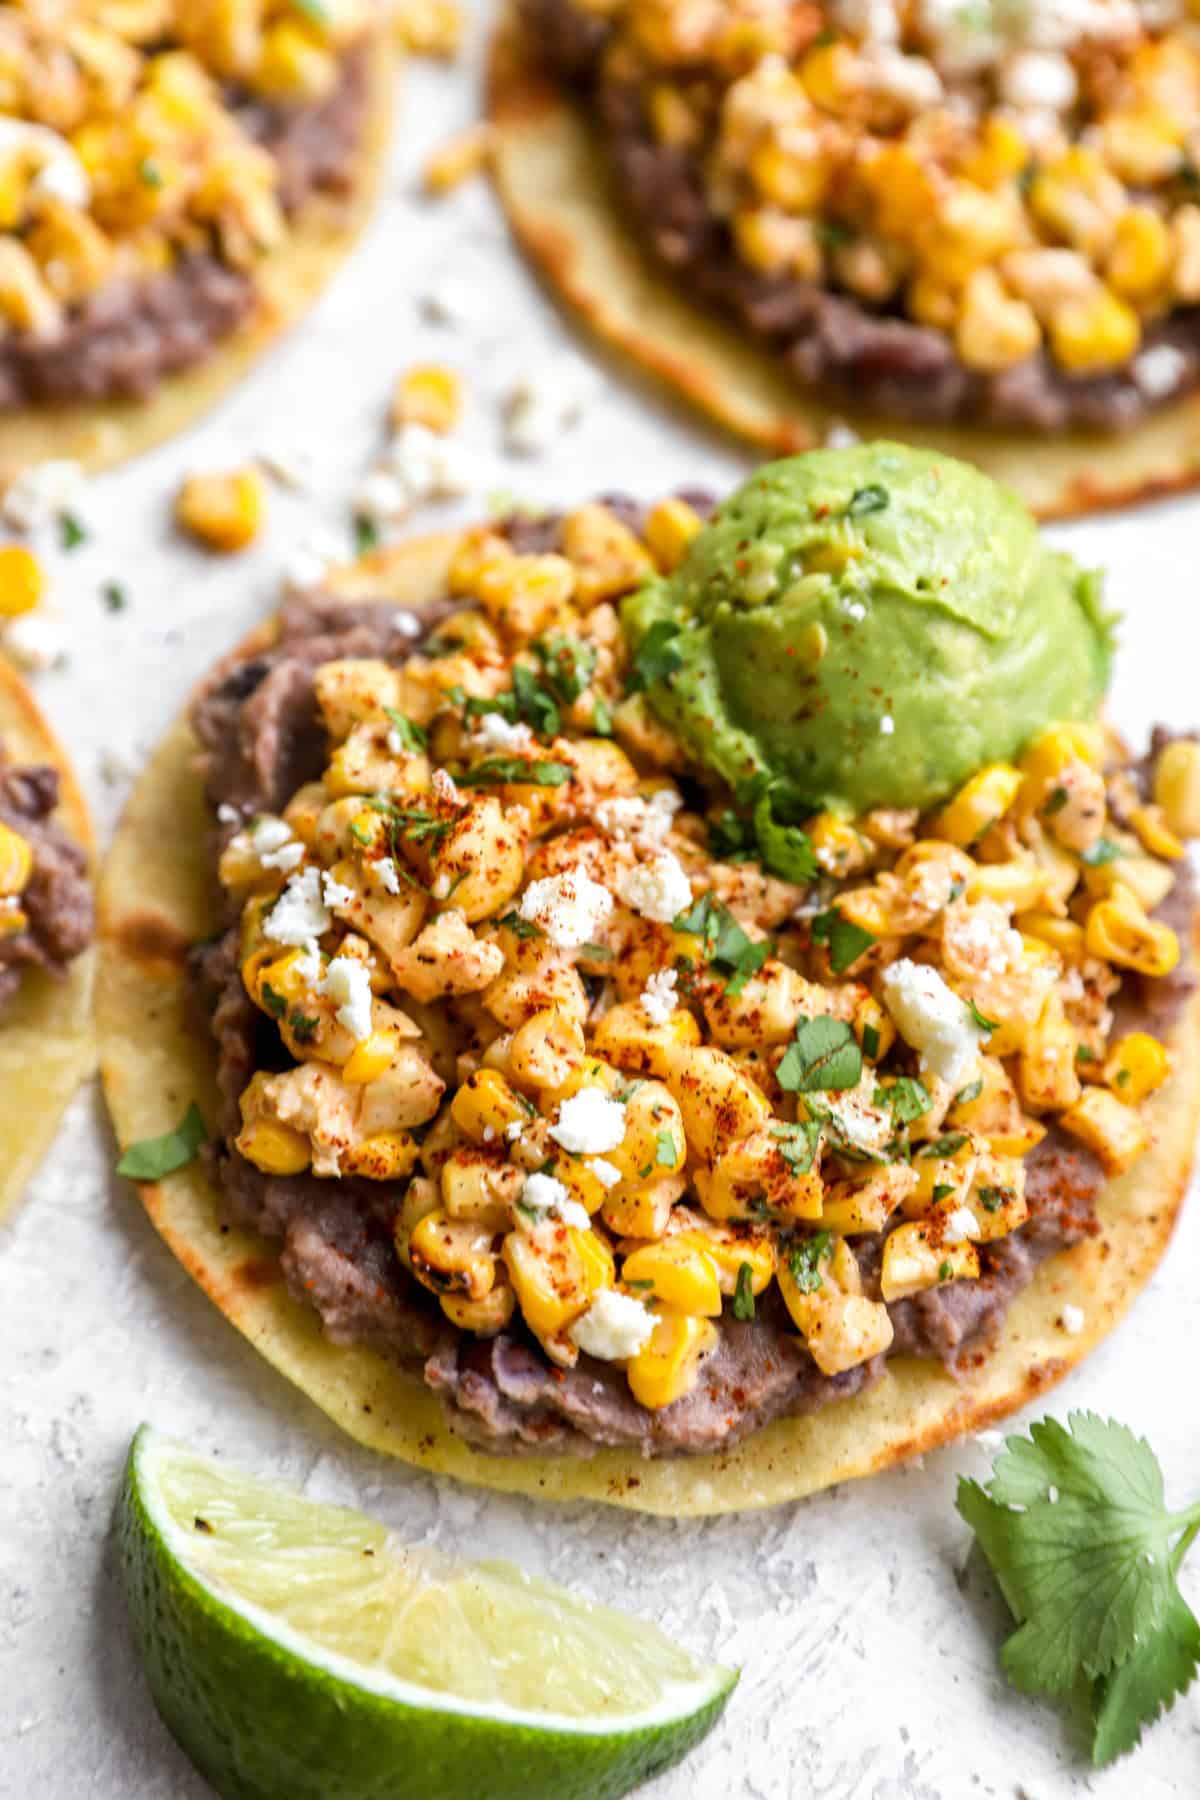 a tostada piled with Mexican corn salad and topped with avocado from above.